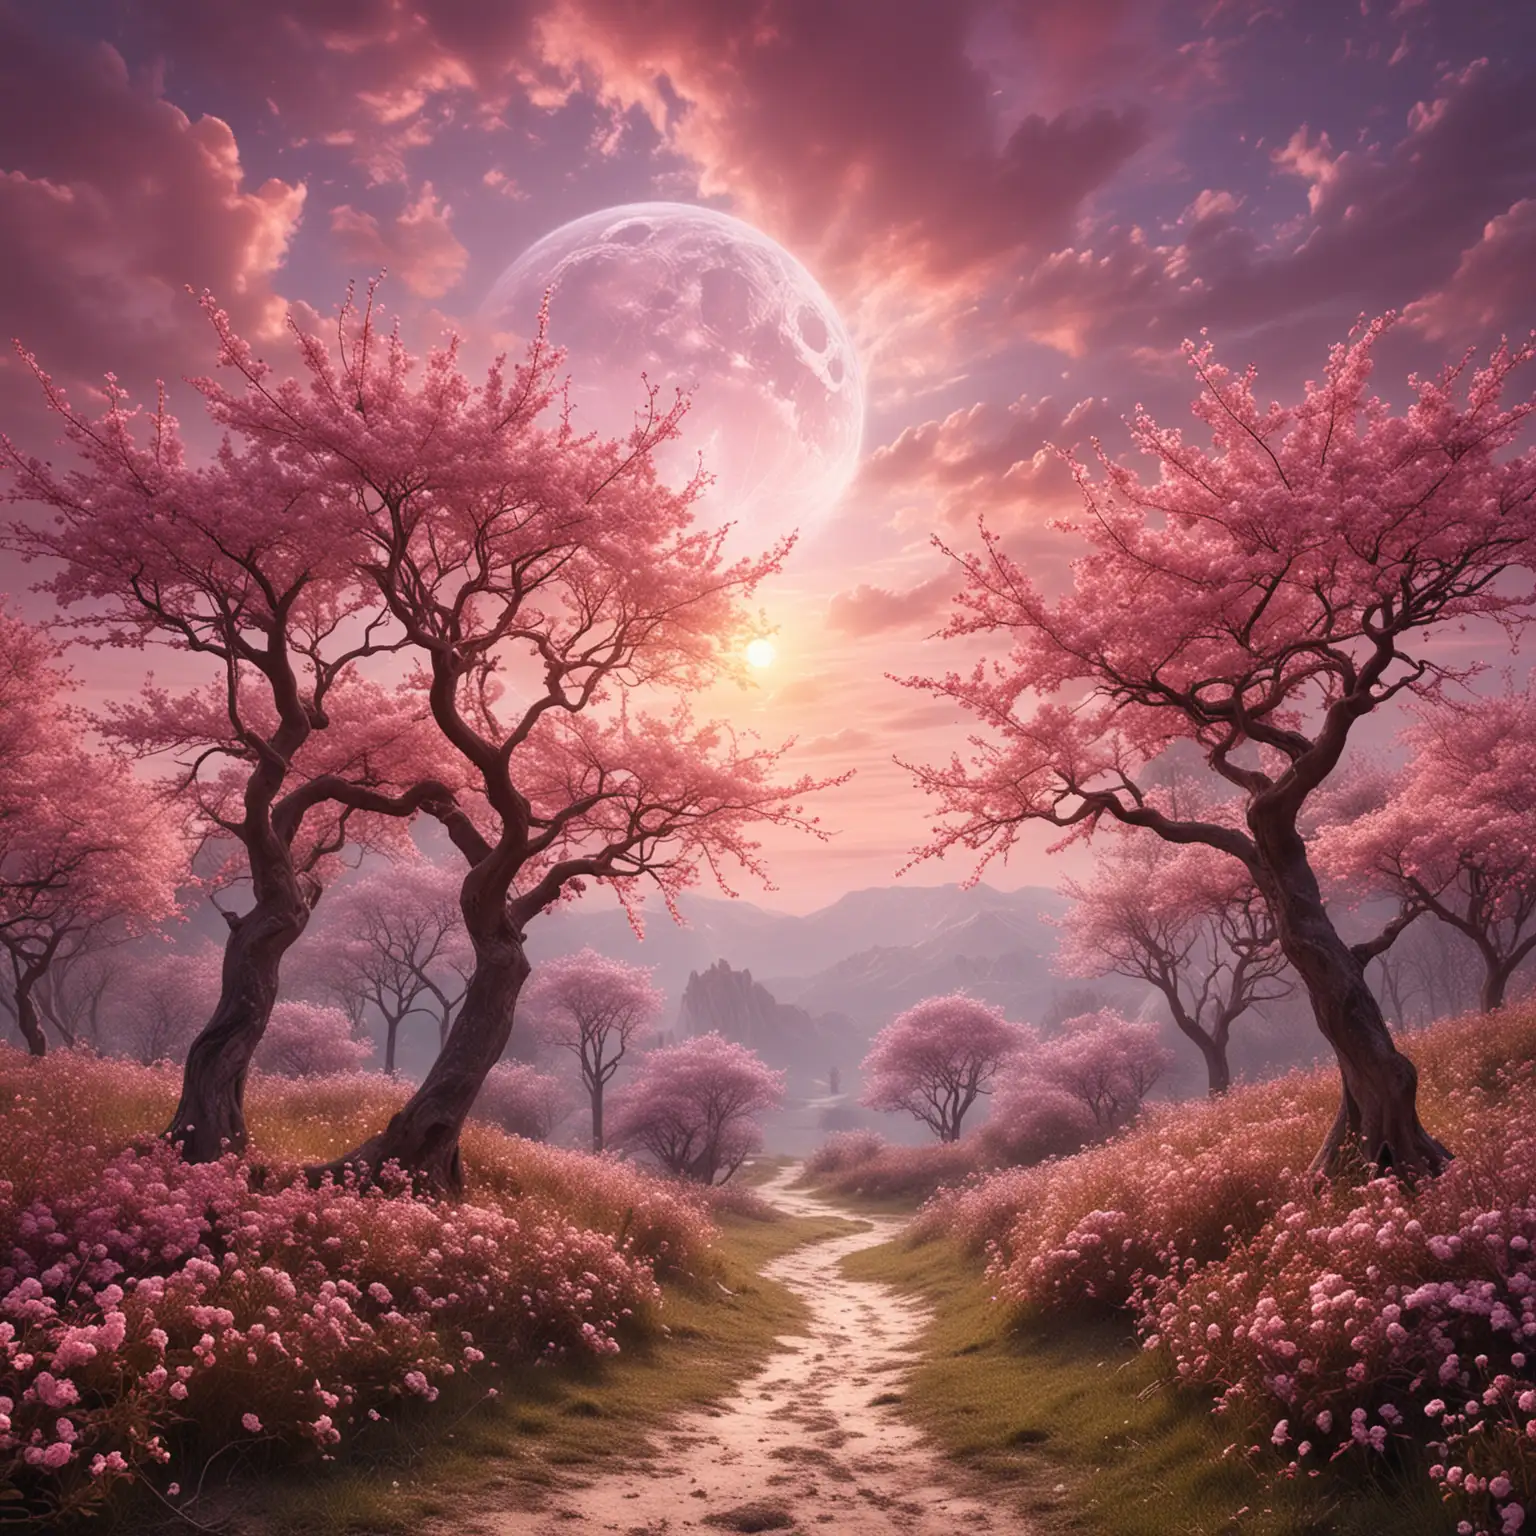 Enchanted Floral Landscape with Mysterious Pastel Tones and Celestial Presence